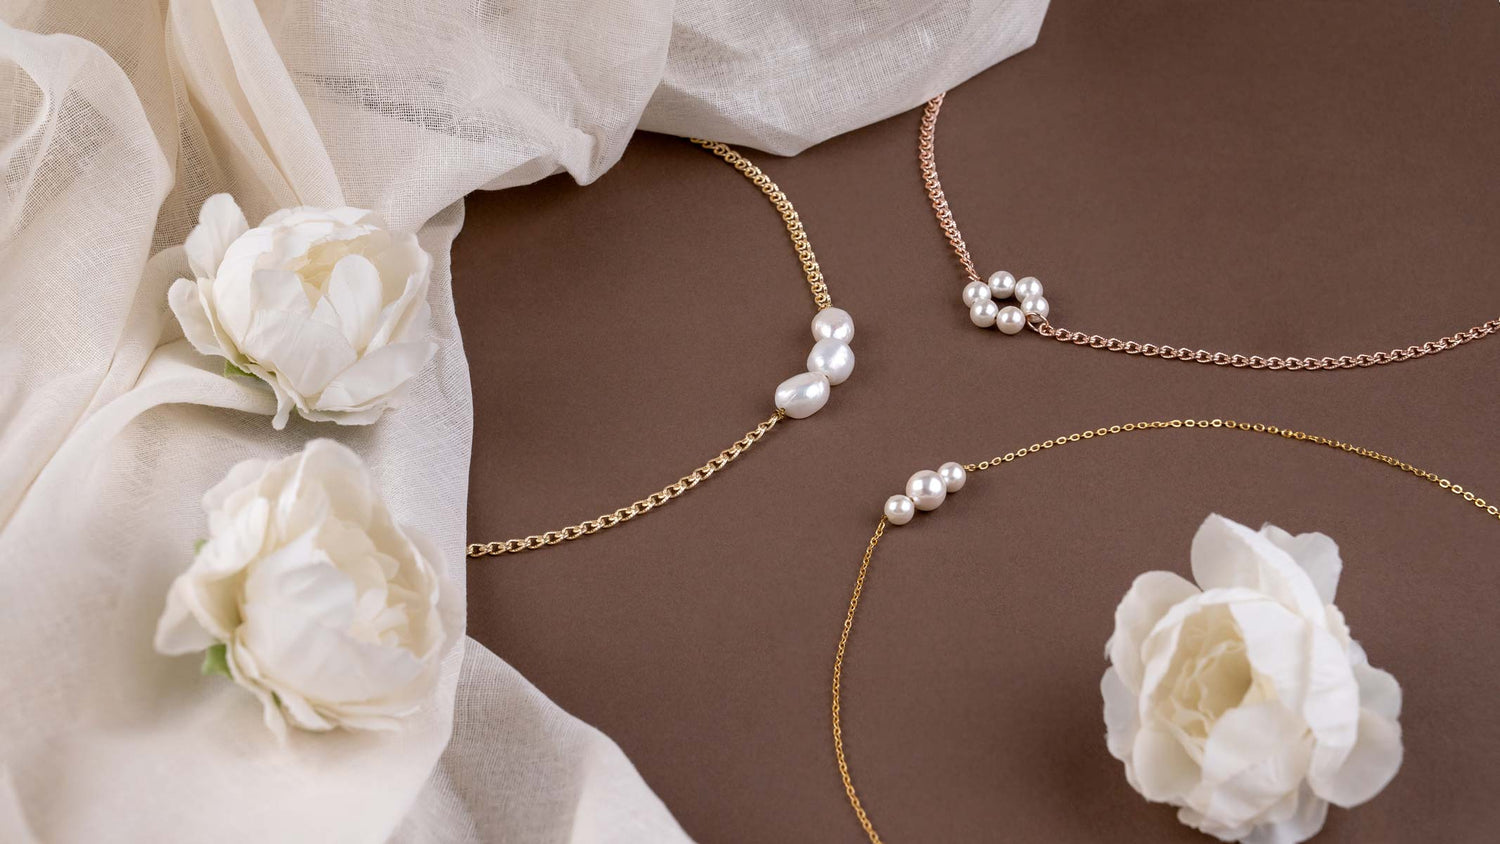 The value of natural pearls: How are natural pearls valued, and what factors affect their price